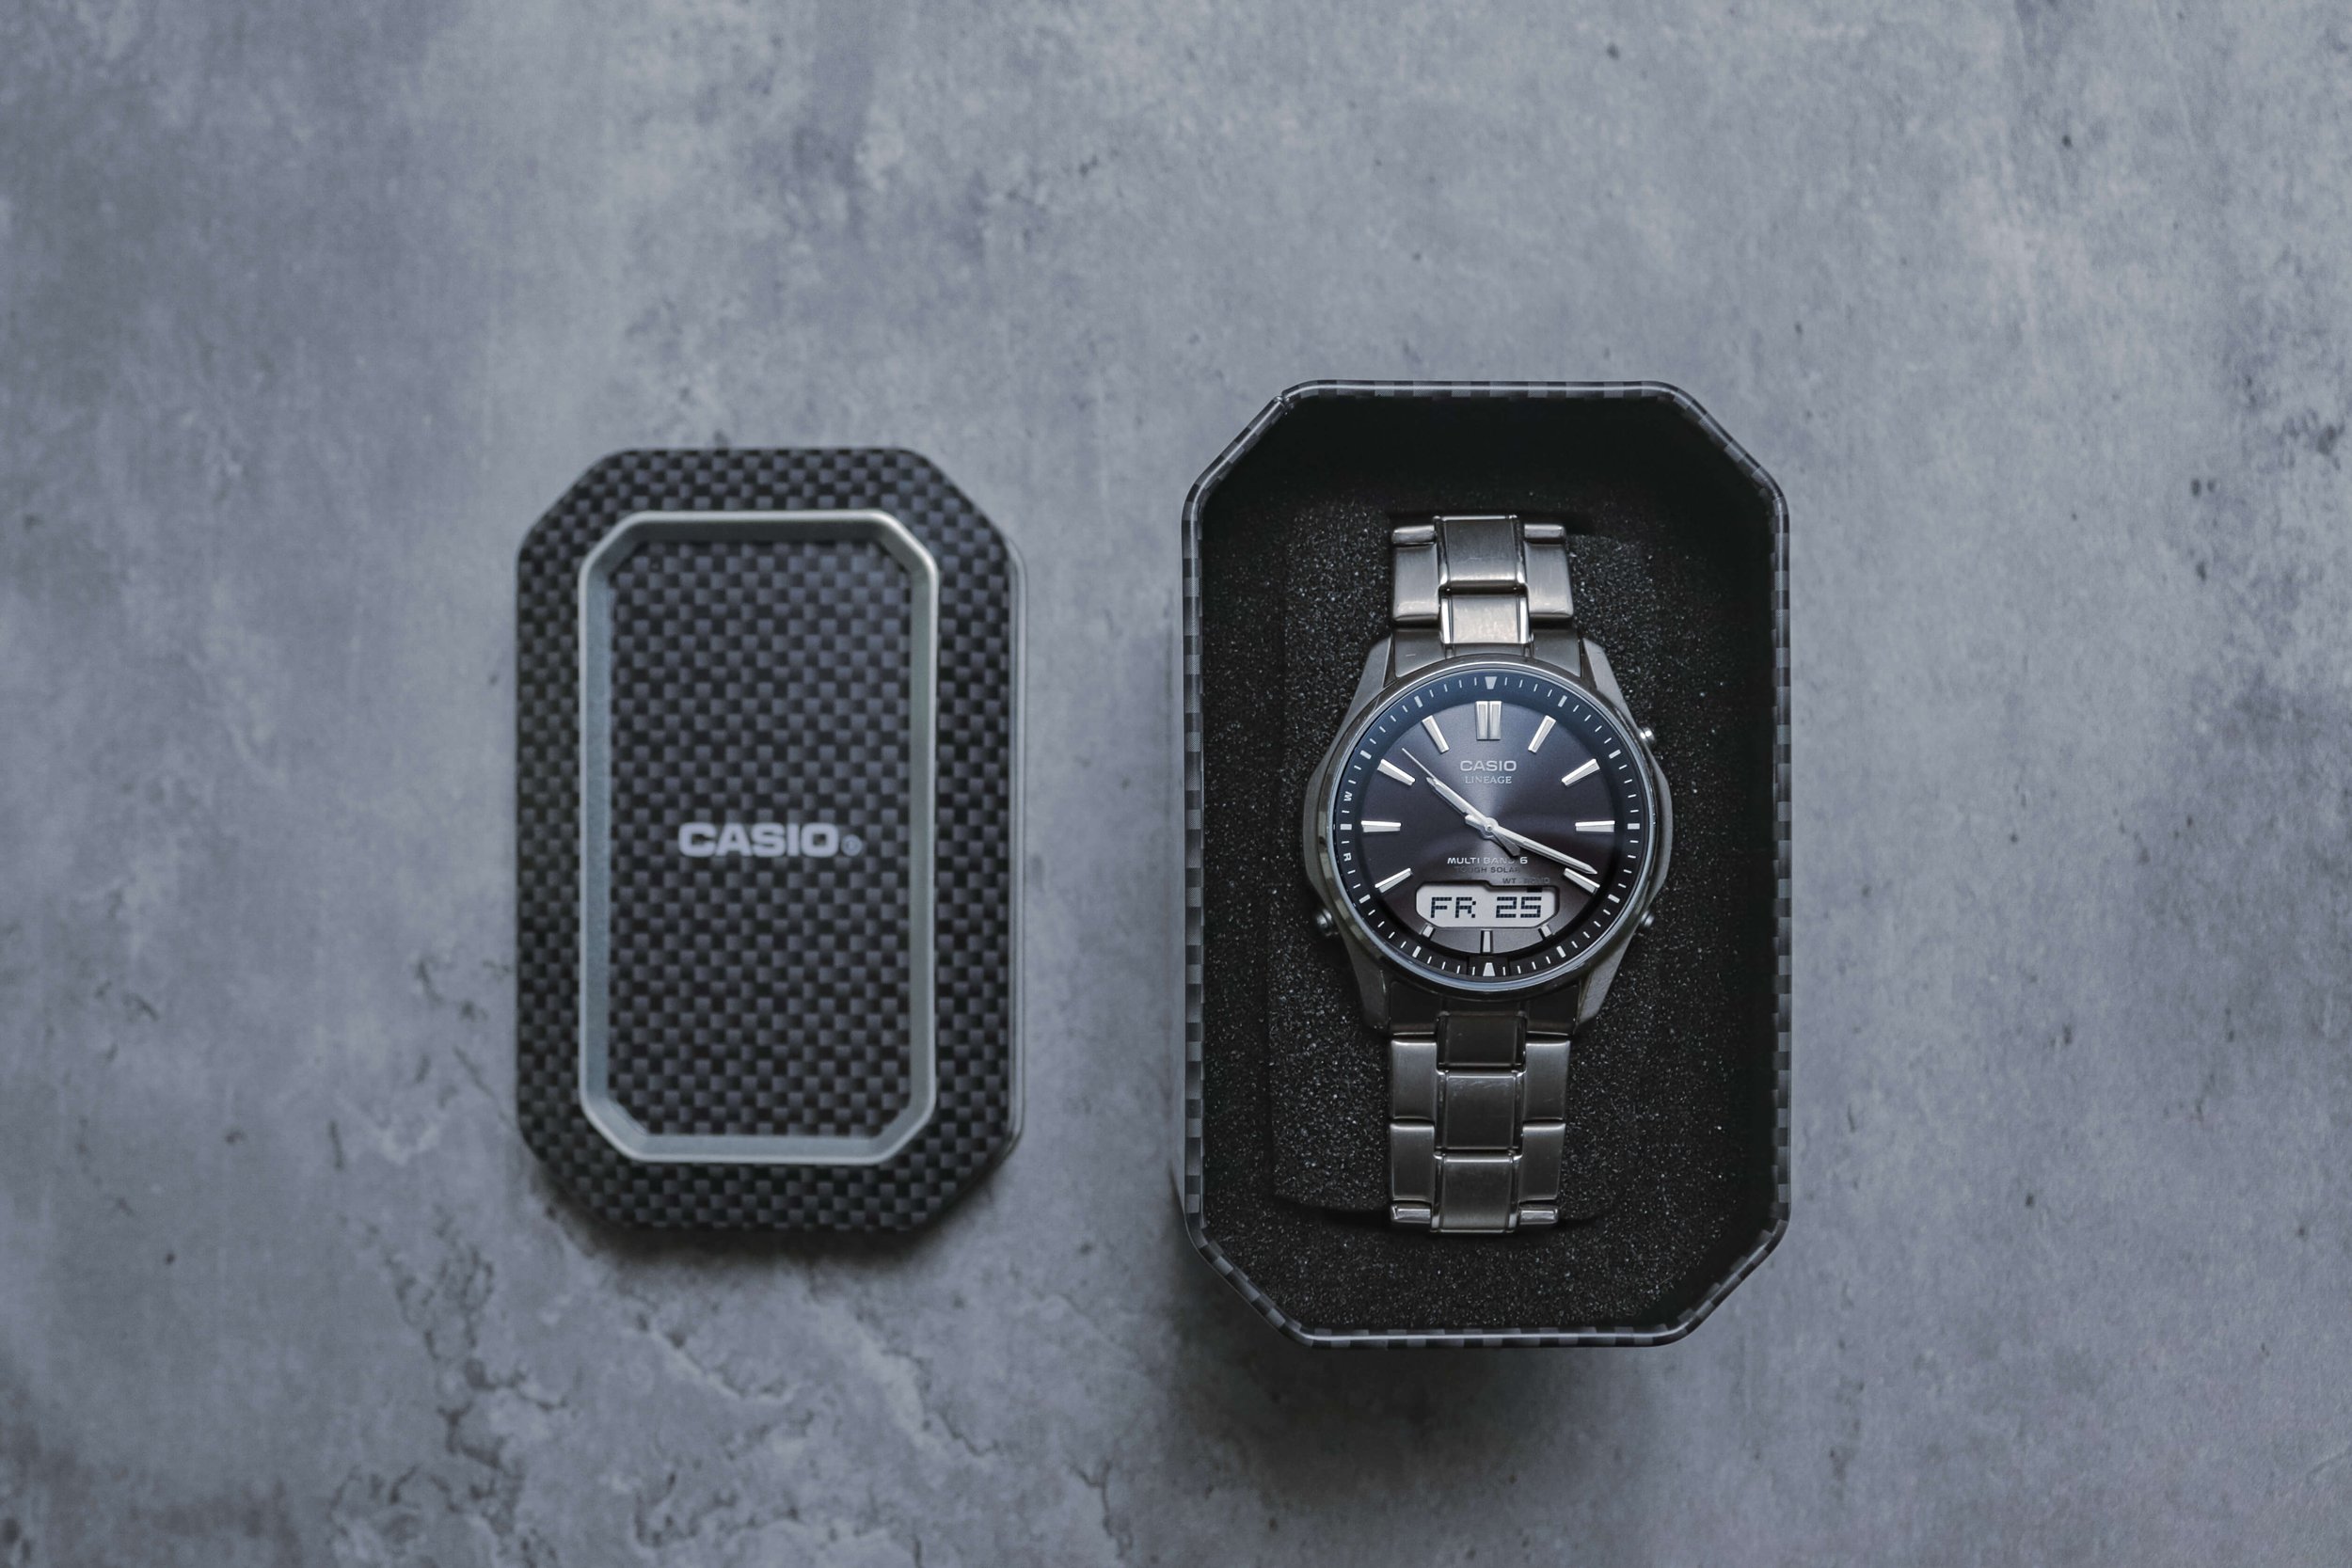 Casio Lineage Titanium Review (LCW-M100TSE-1AER) Greatest Watch Ever Made? — Ben's Watch Club